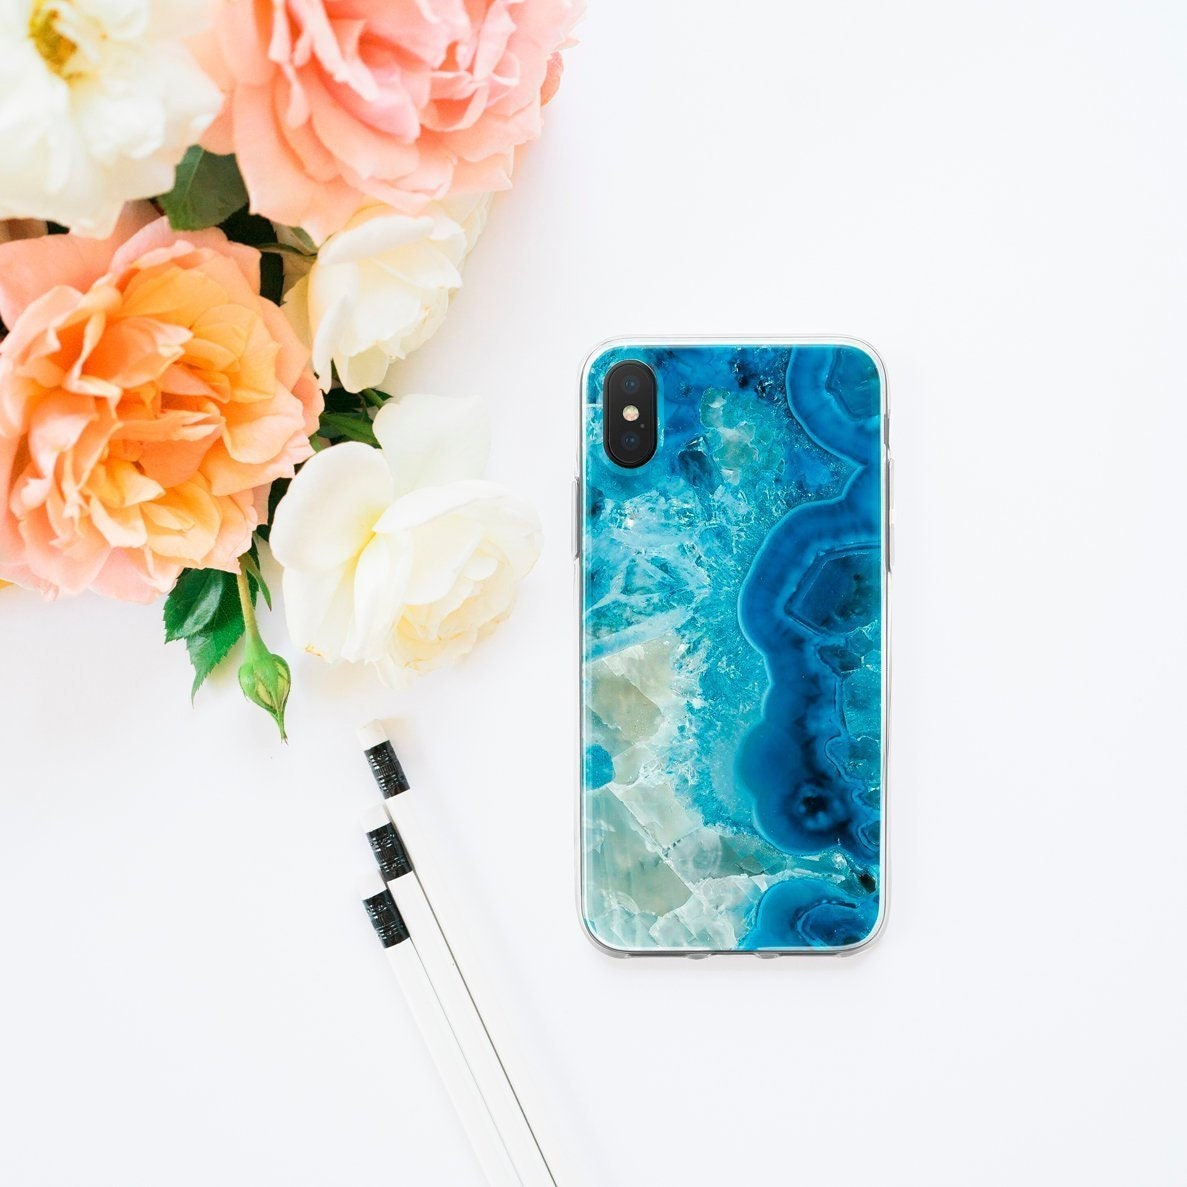 iPhone X 10 Case Samsung Galaxy S10 S8 Light Blue Abstract Marble Cover iPhone 11 Pro max iPhone XS iPhone 8 7 plus case iPhone XS Max